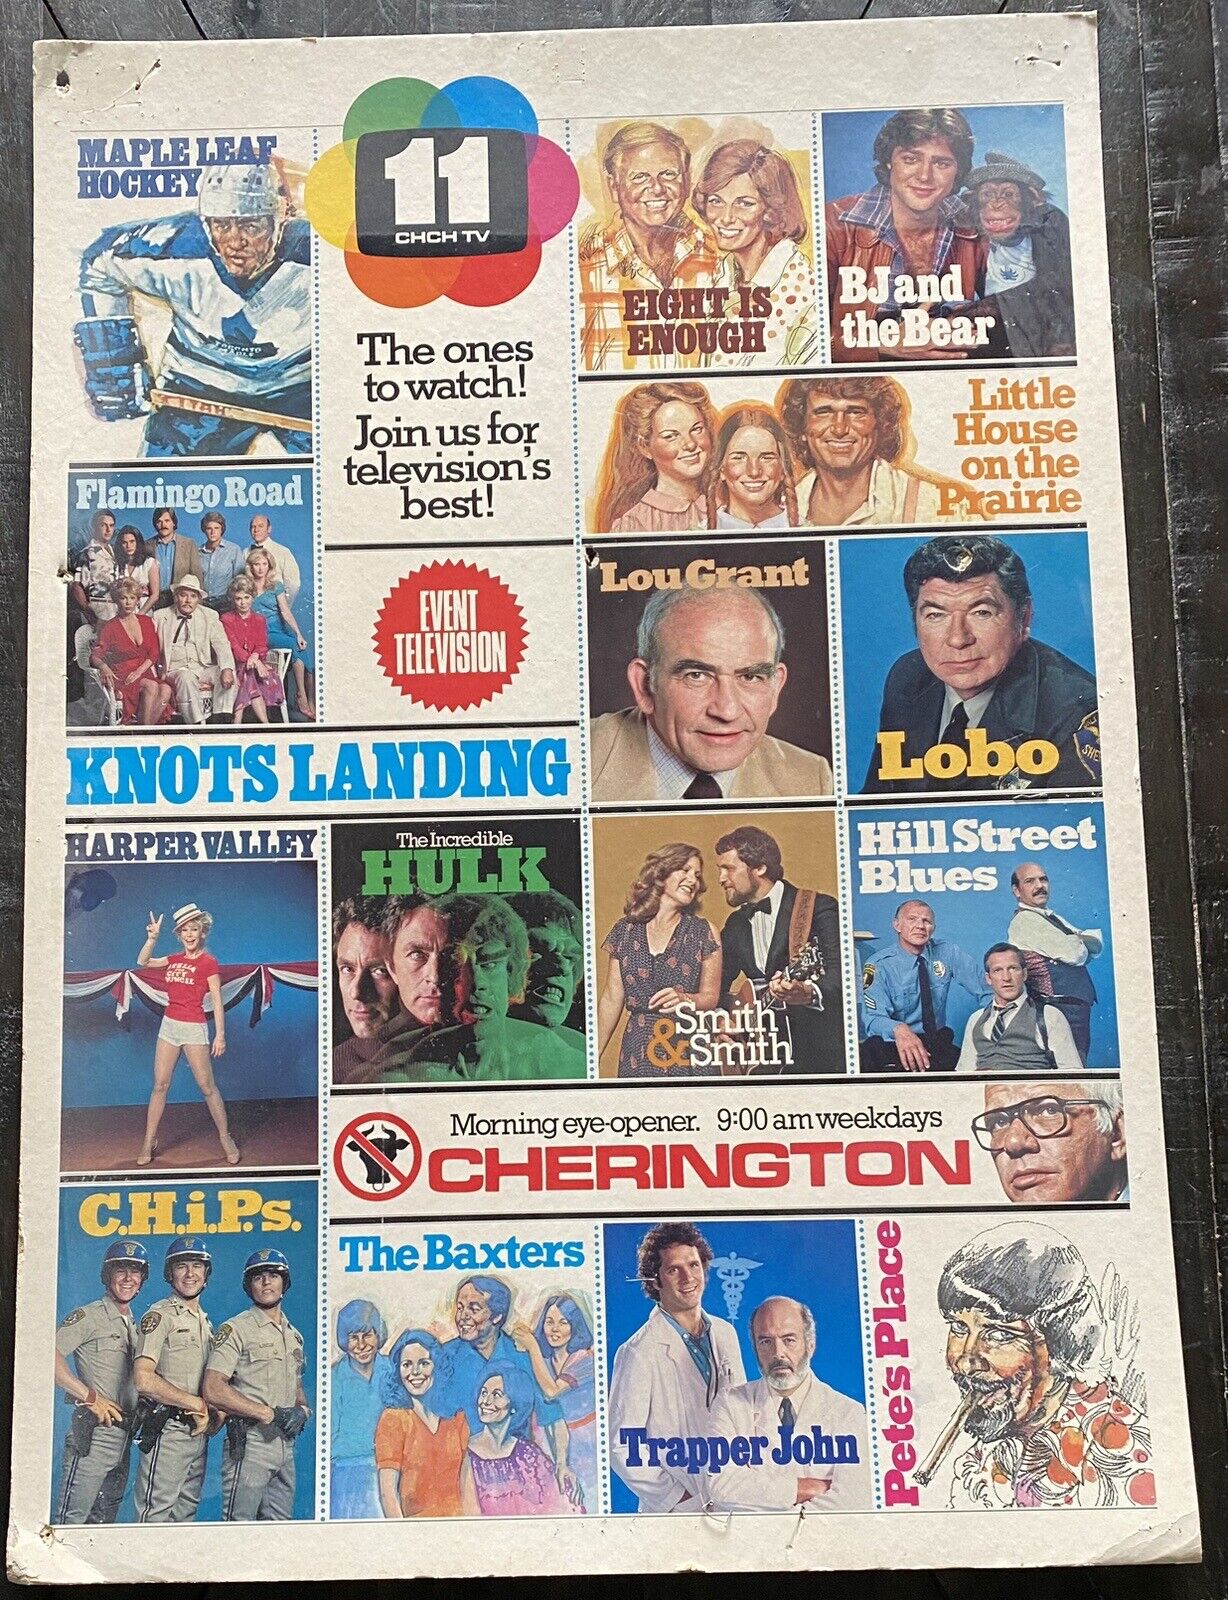 Vintage 1970s Promotional TV Shows Poster Board NHL Hockey-Chips-BJ And The Bear